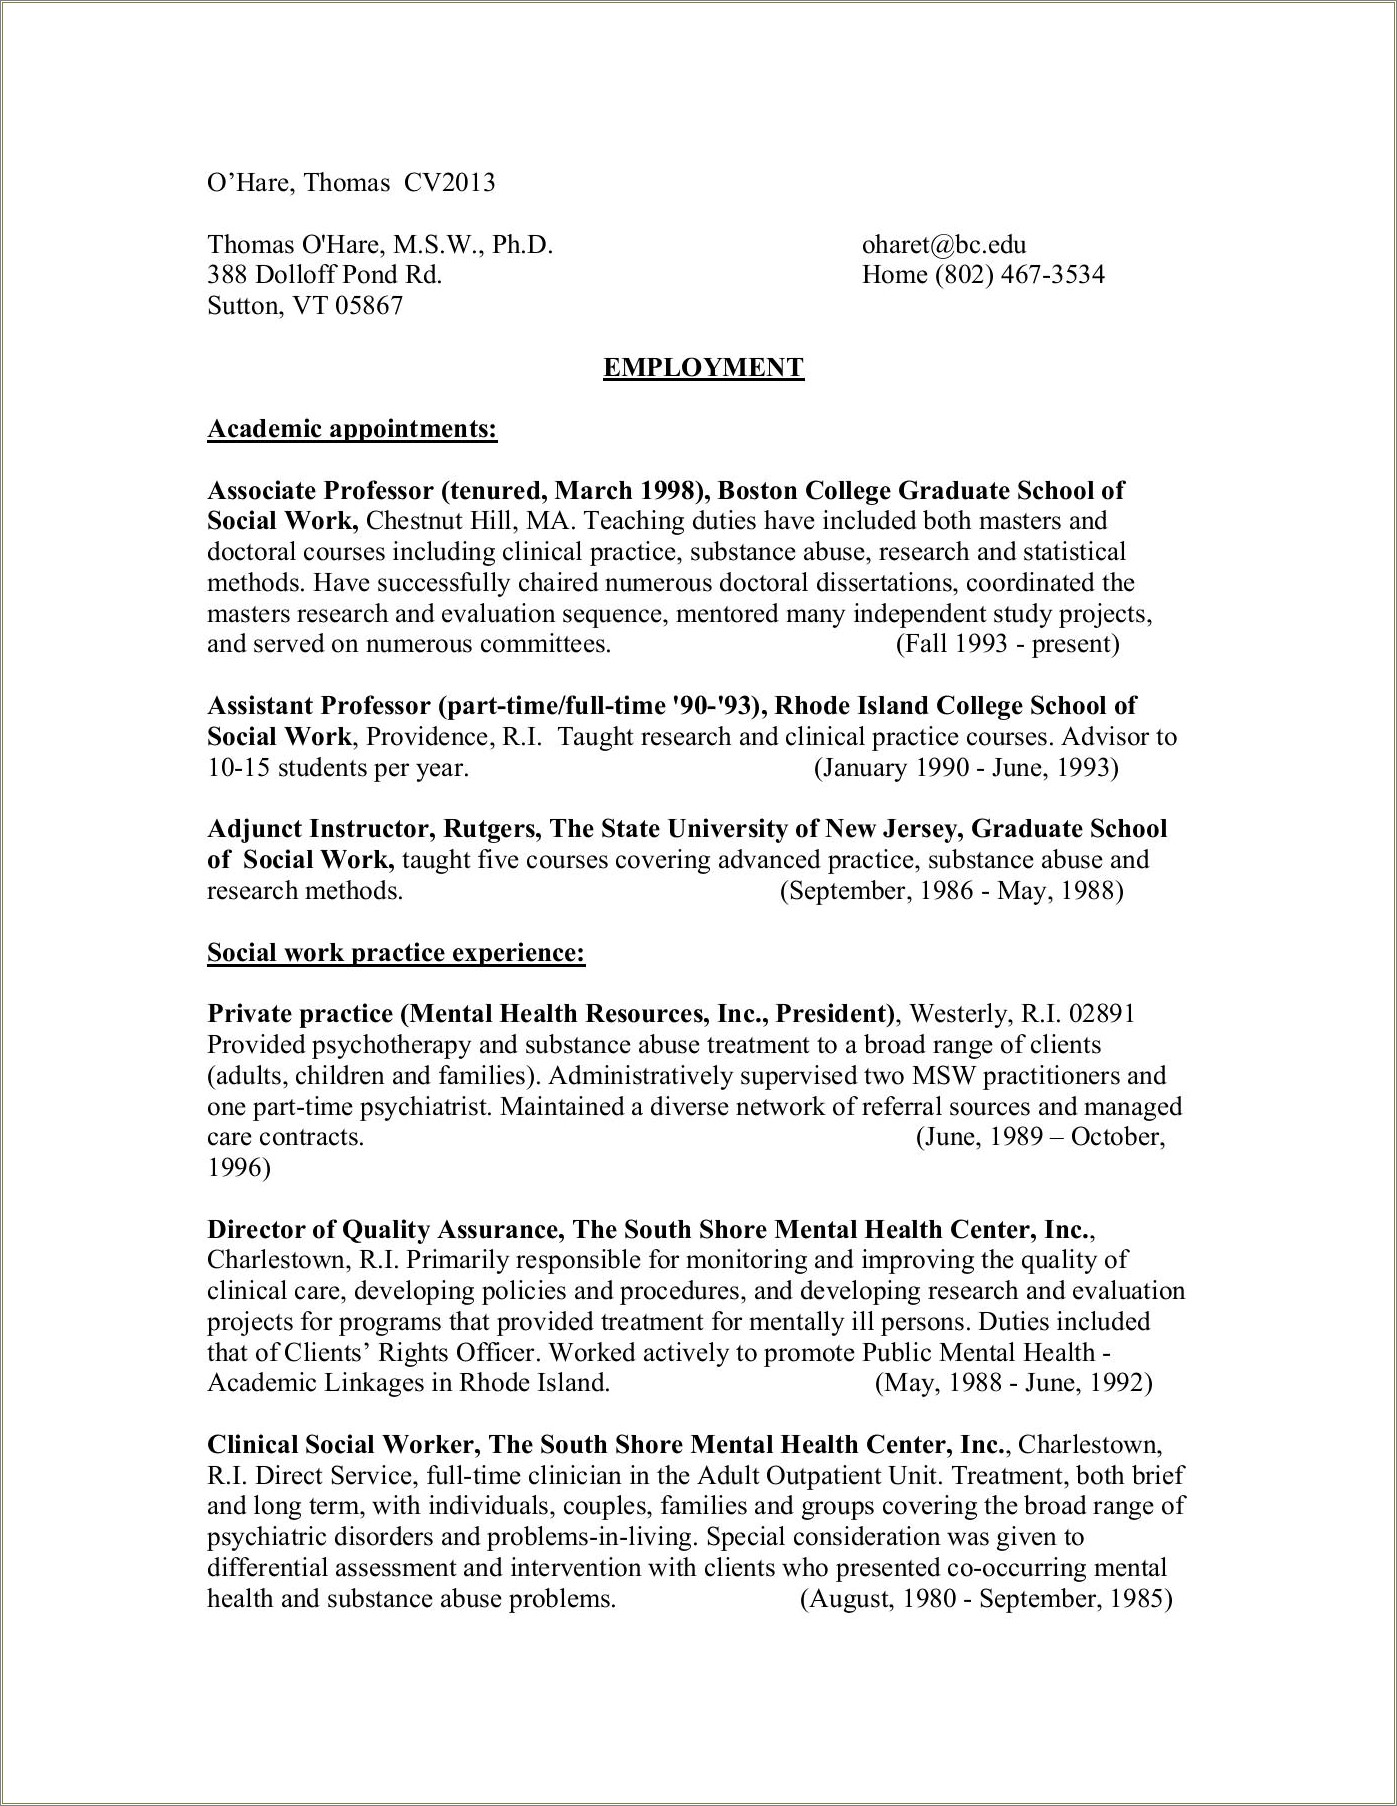 Ressidential Aide Substance Abuse Description Resume